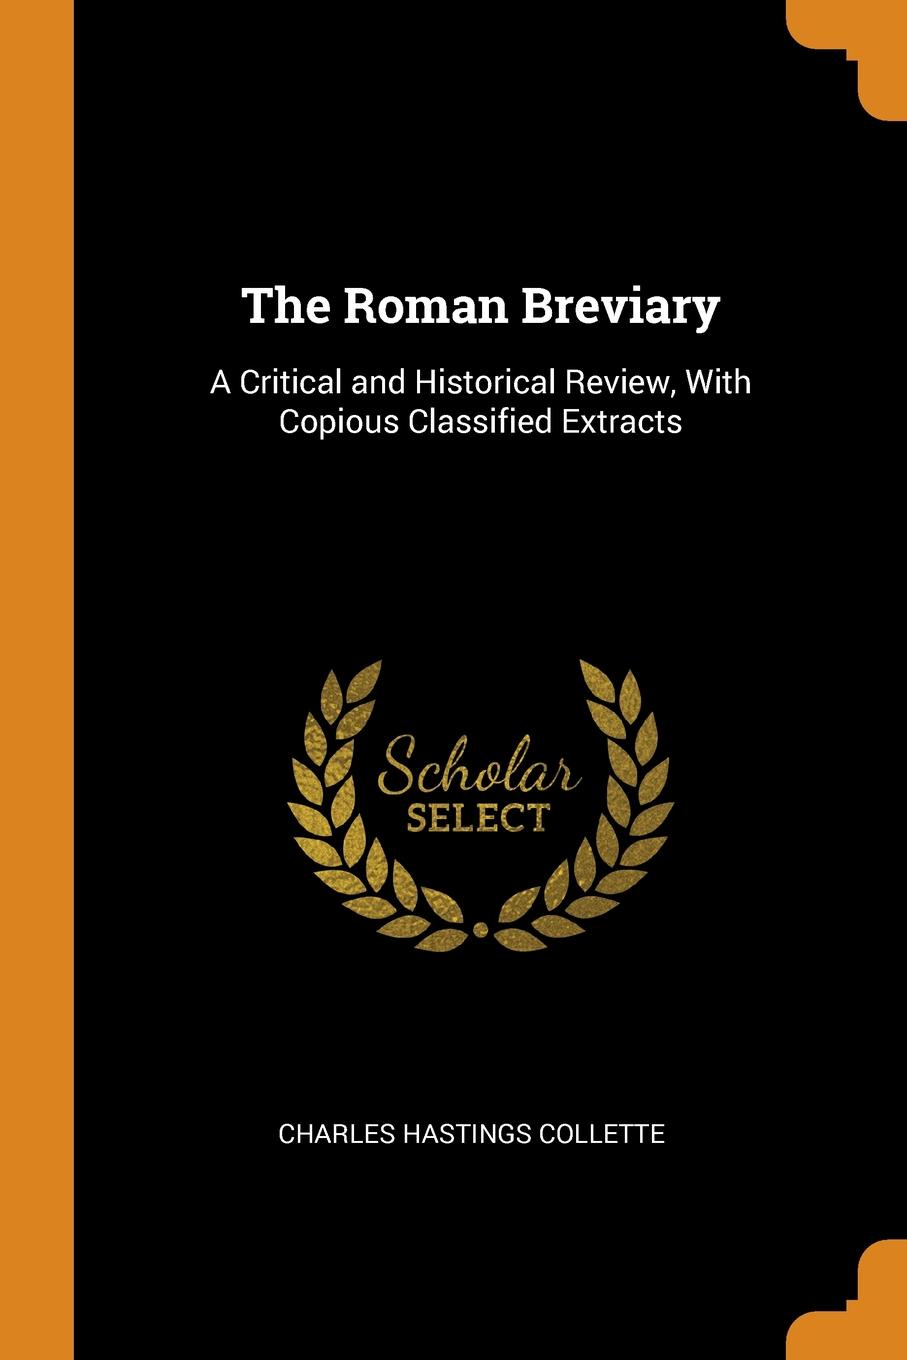 Charles Hastings Collette The Roman Breviary. A Critical and Historical Review, With Copious Classified Extracts